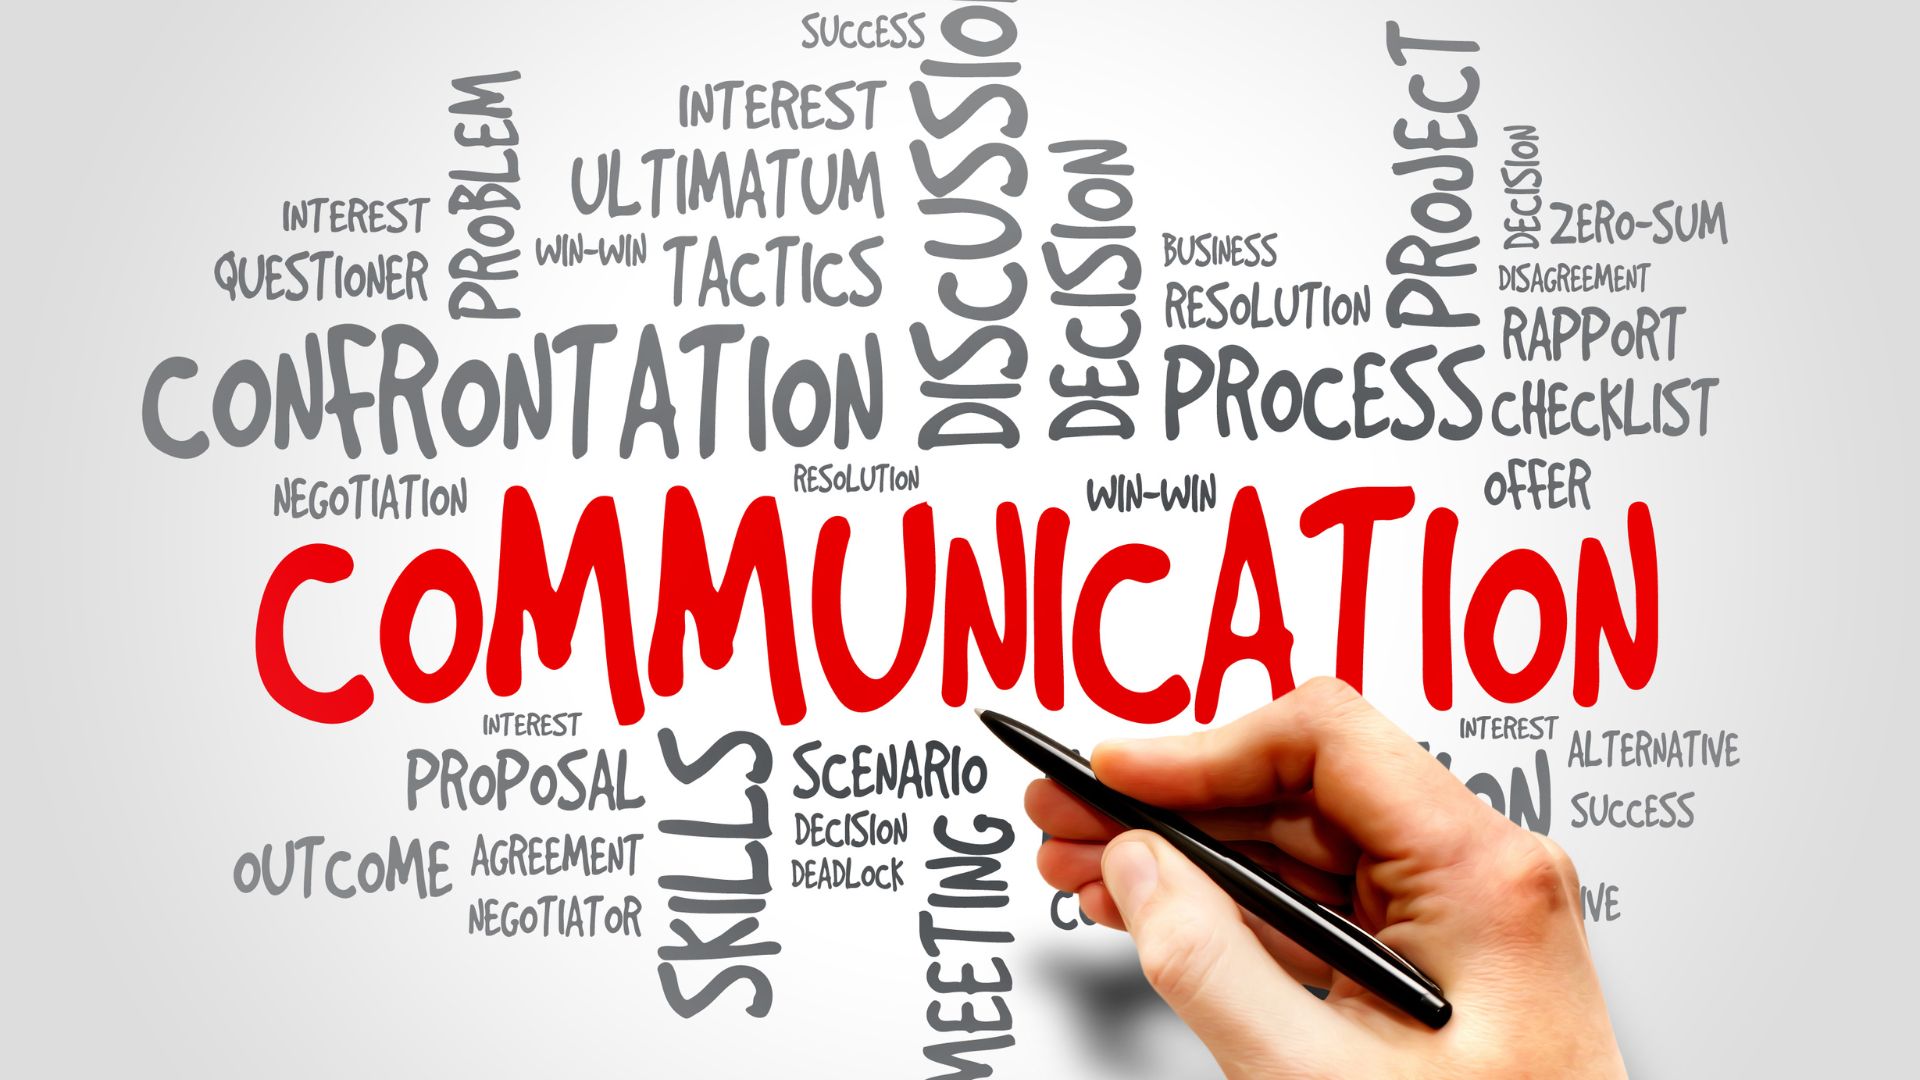 8 tips for communication in the workplace that will help your volunteer organization thrive